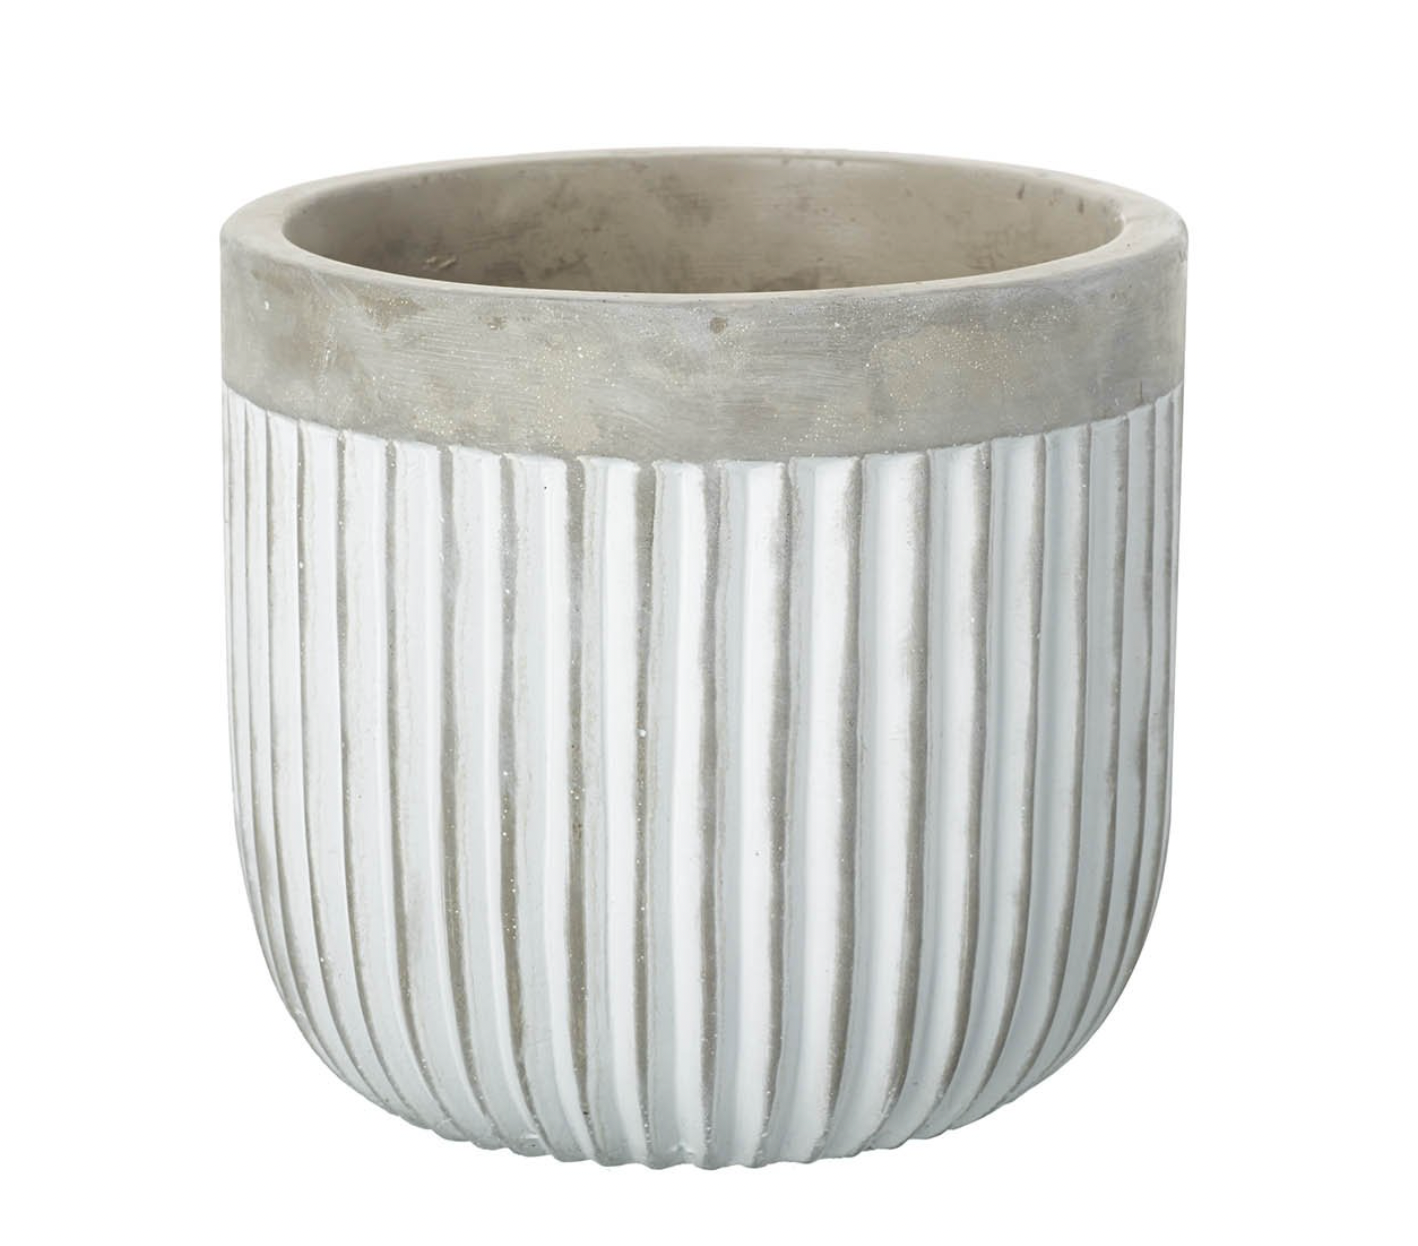 Cement Grey Langford Planter (Small)